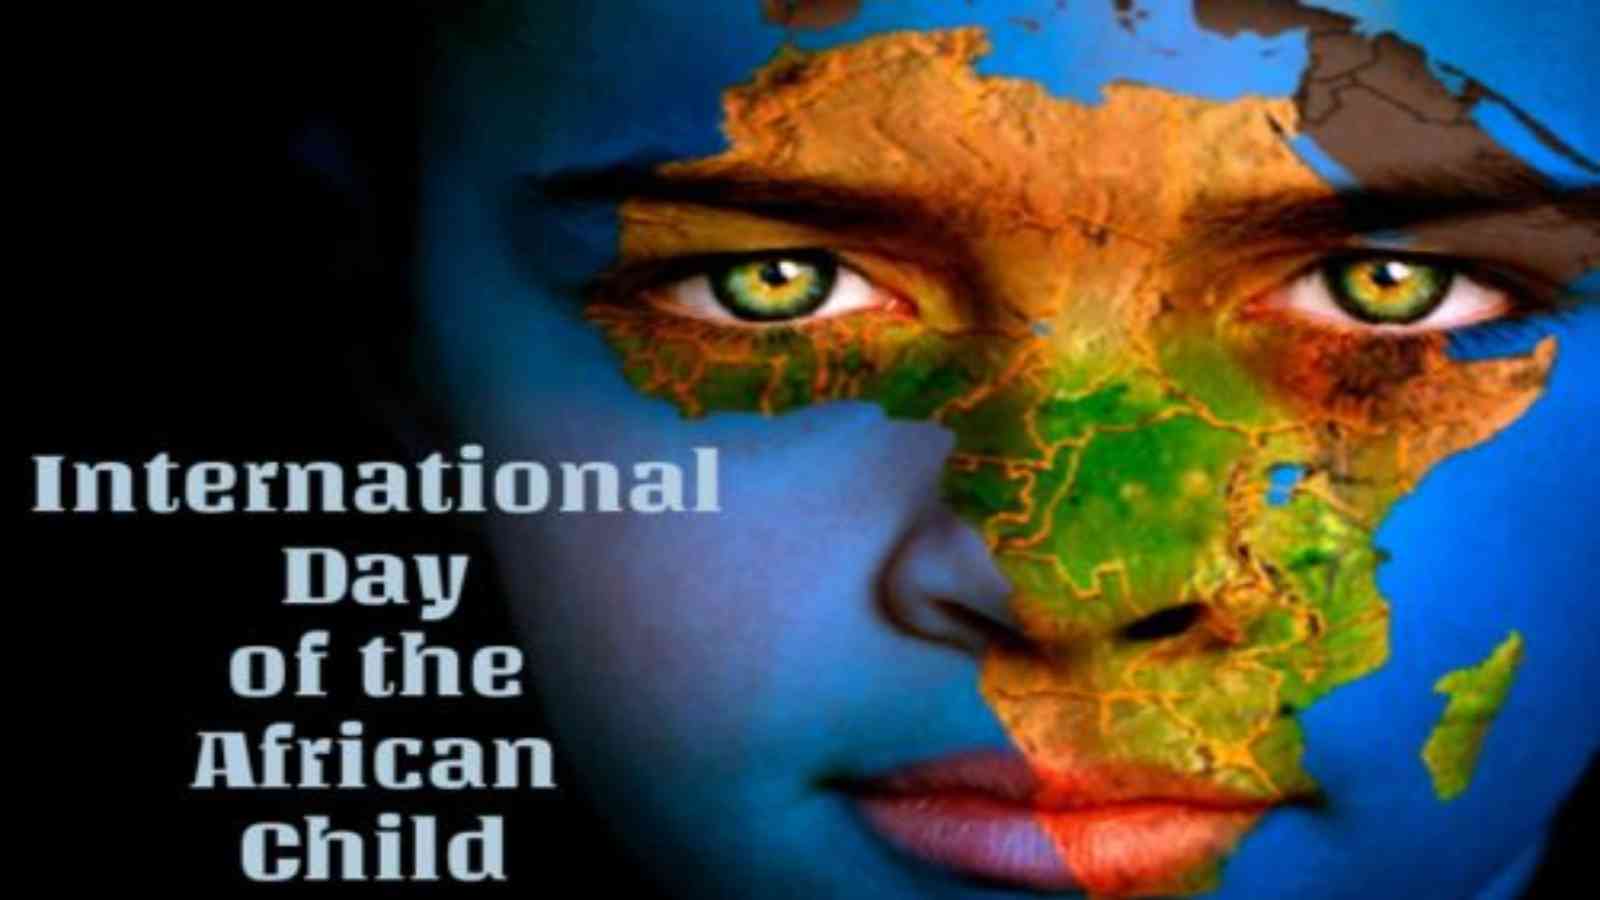 International Day of the African Child 2022: Date, History